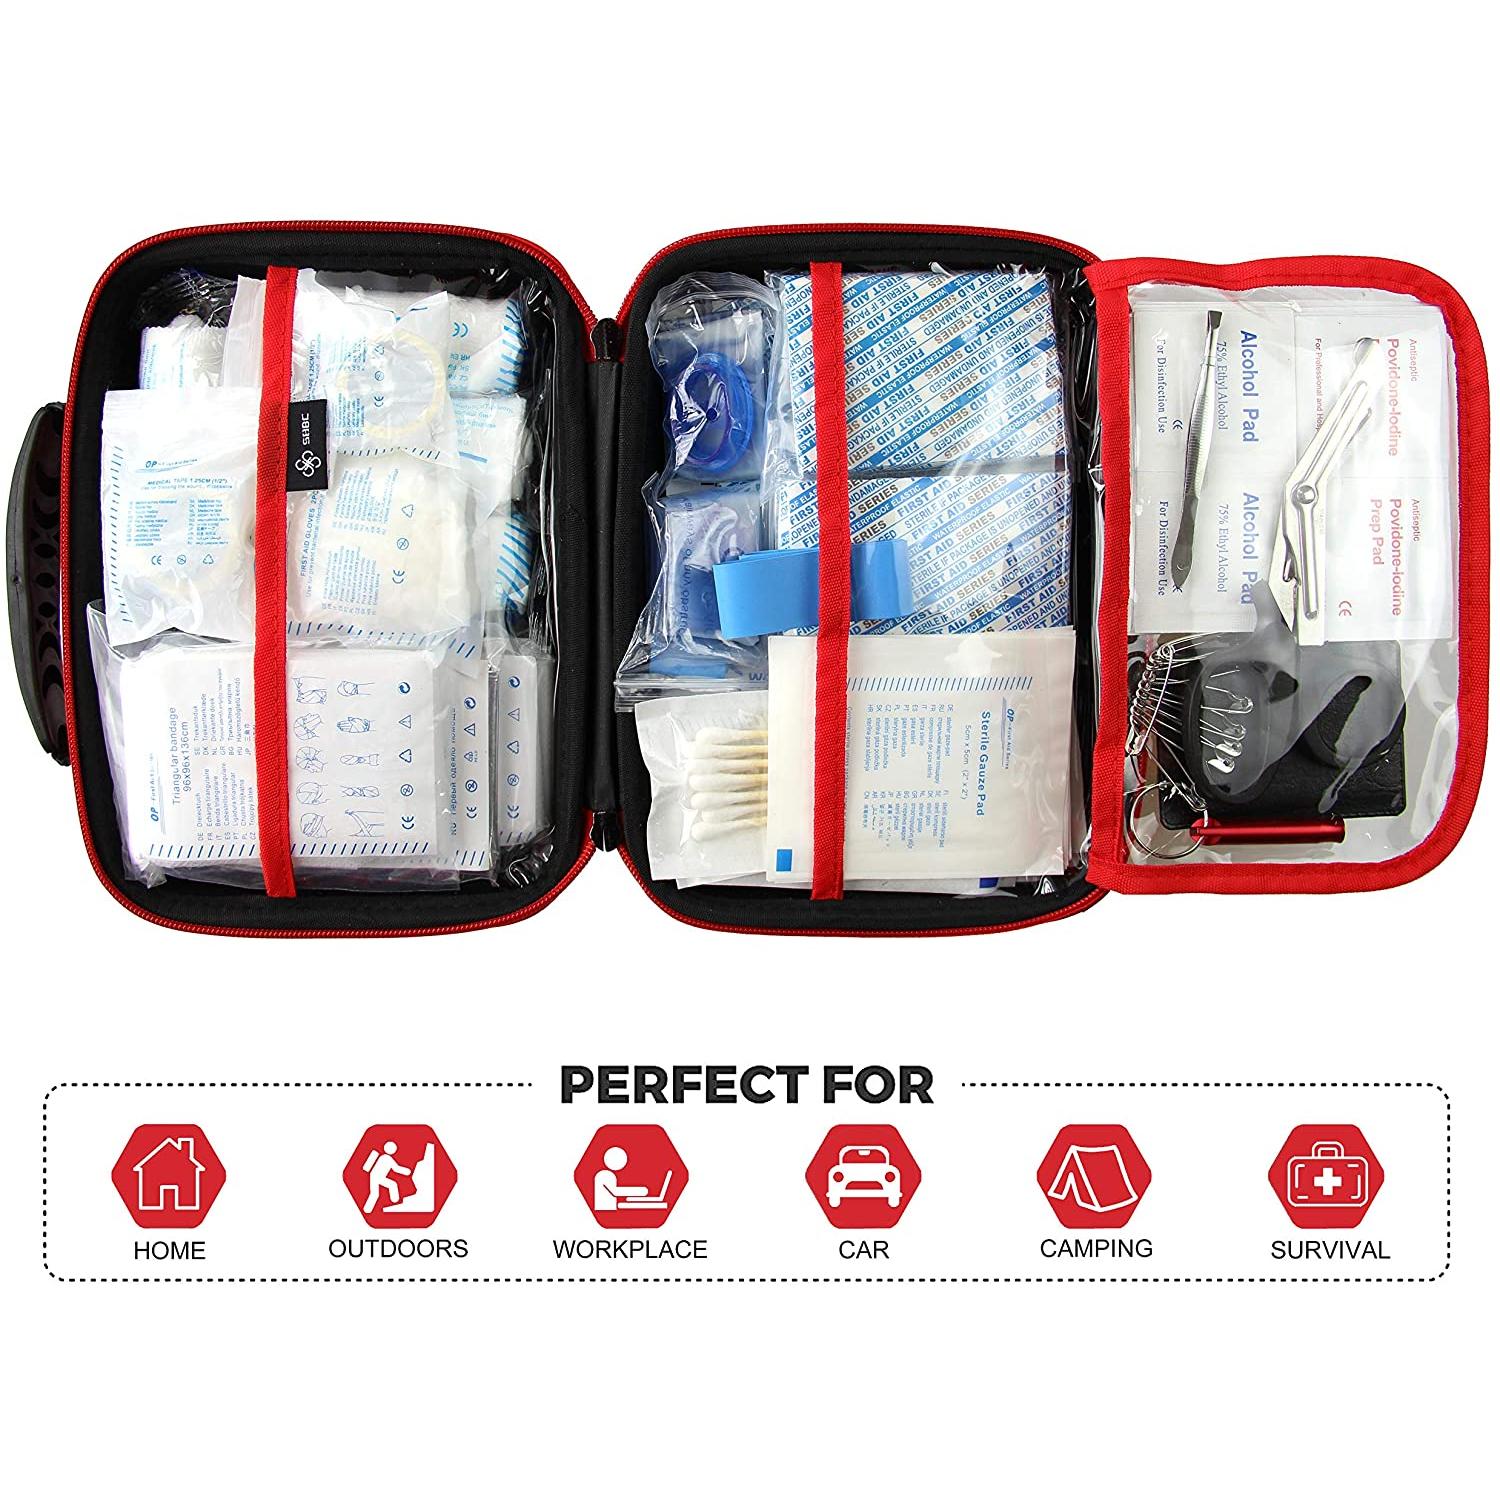 Super Mom First Aid Kit, 85 Piece Set, Compact and Portable for Home,  Camping, Vehicle, Emergency or Travel Safety, Treat Cuts, Scrapes, Burns  and